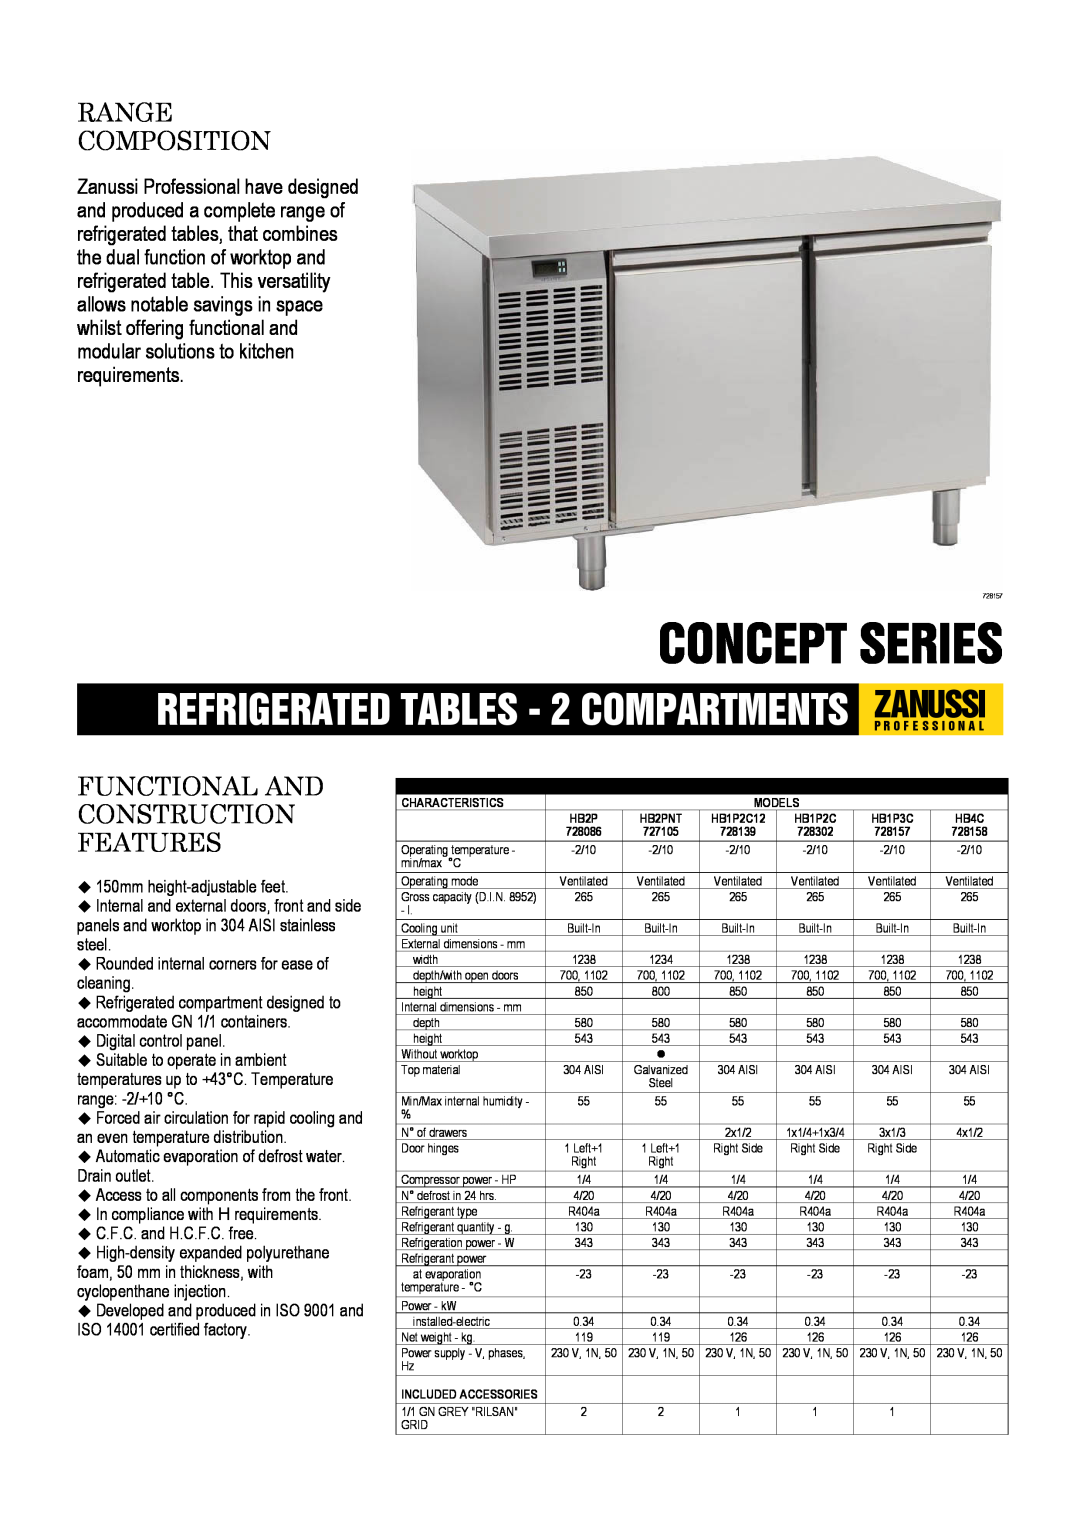 Zanussi 728157, 728302, 728158, 727105 dimensions Concept Series, Range Composition, Functional And Construction Features 